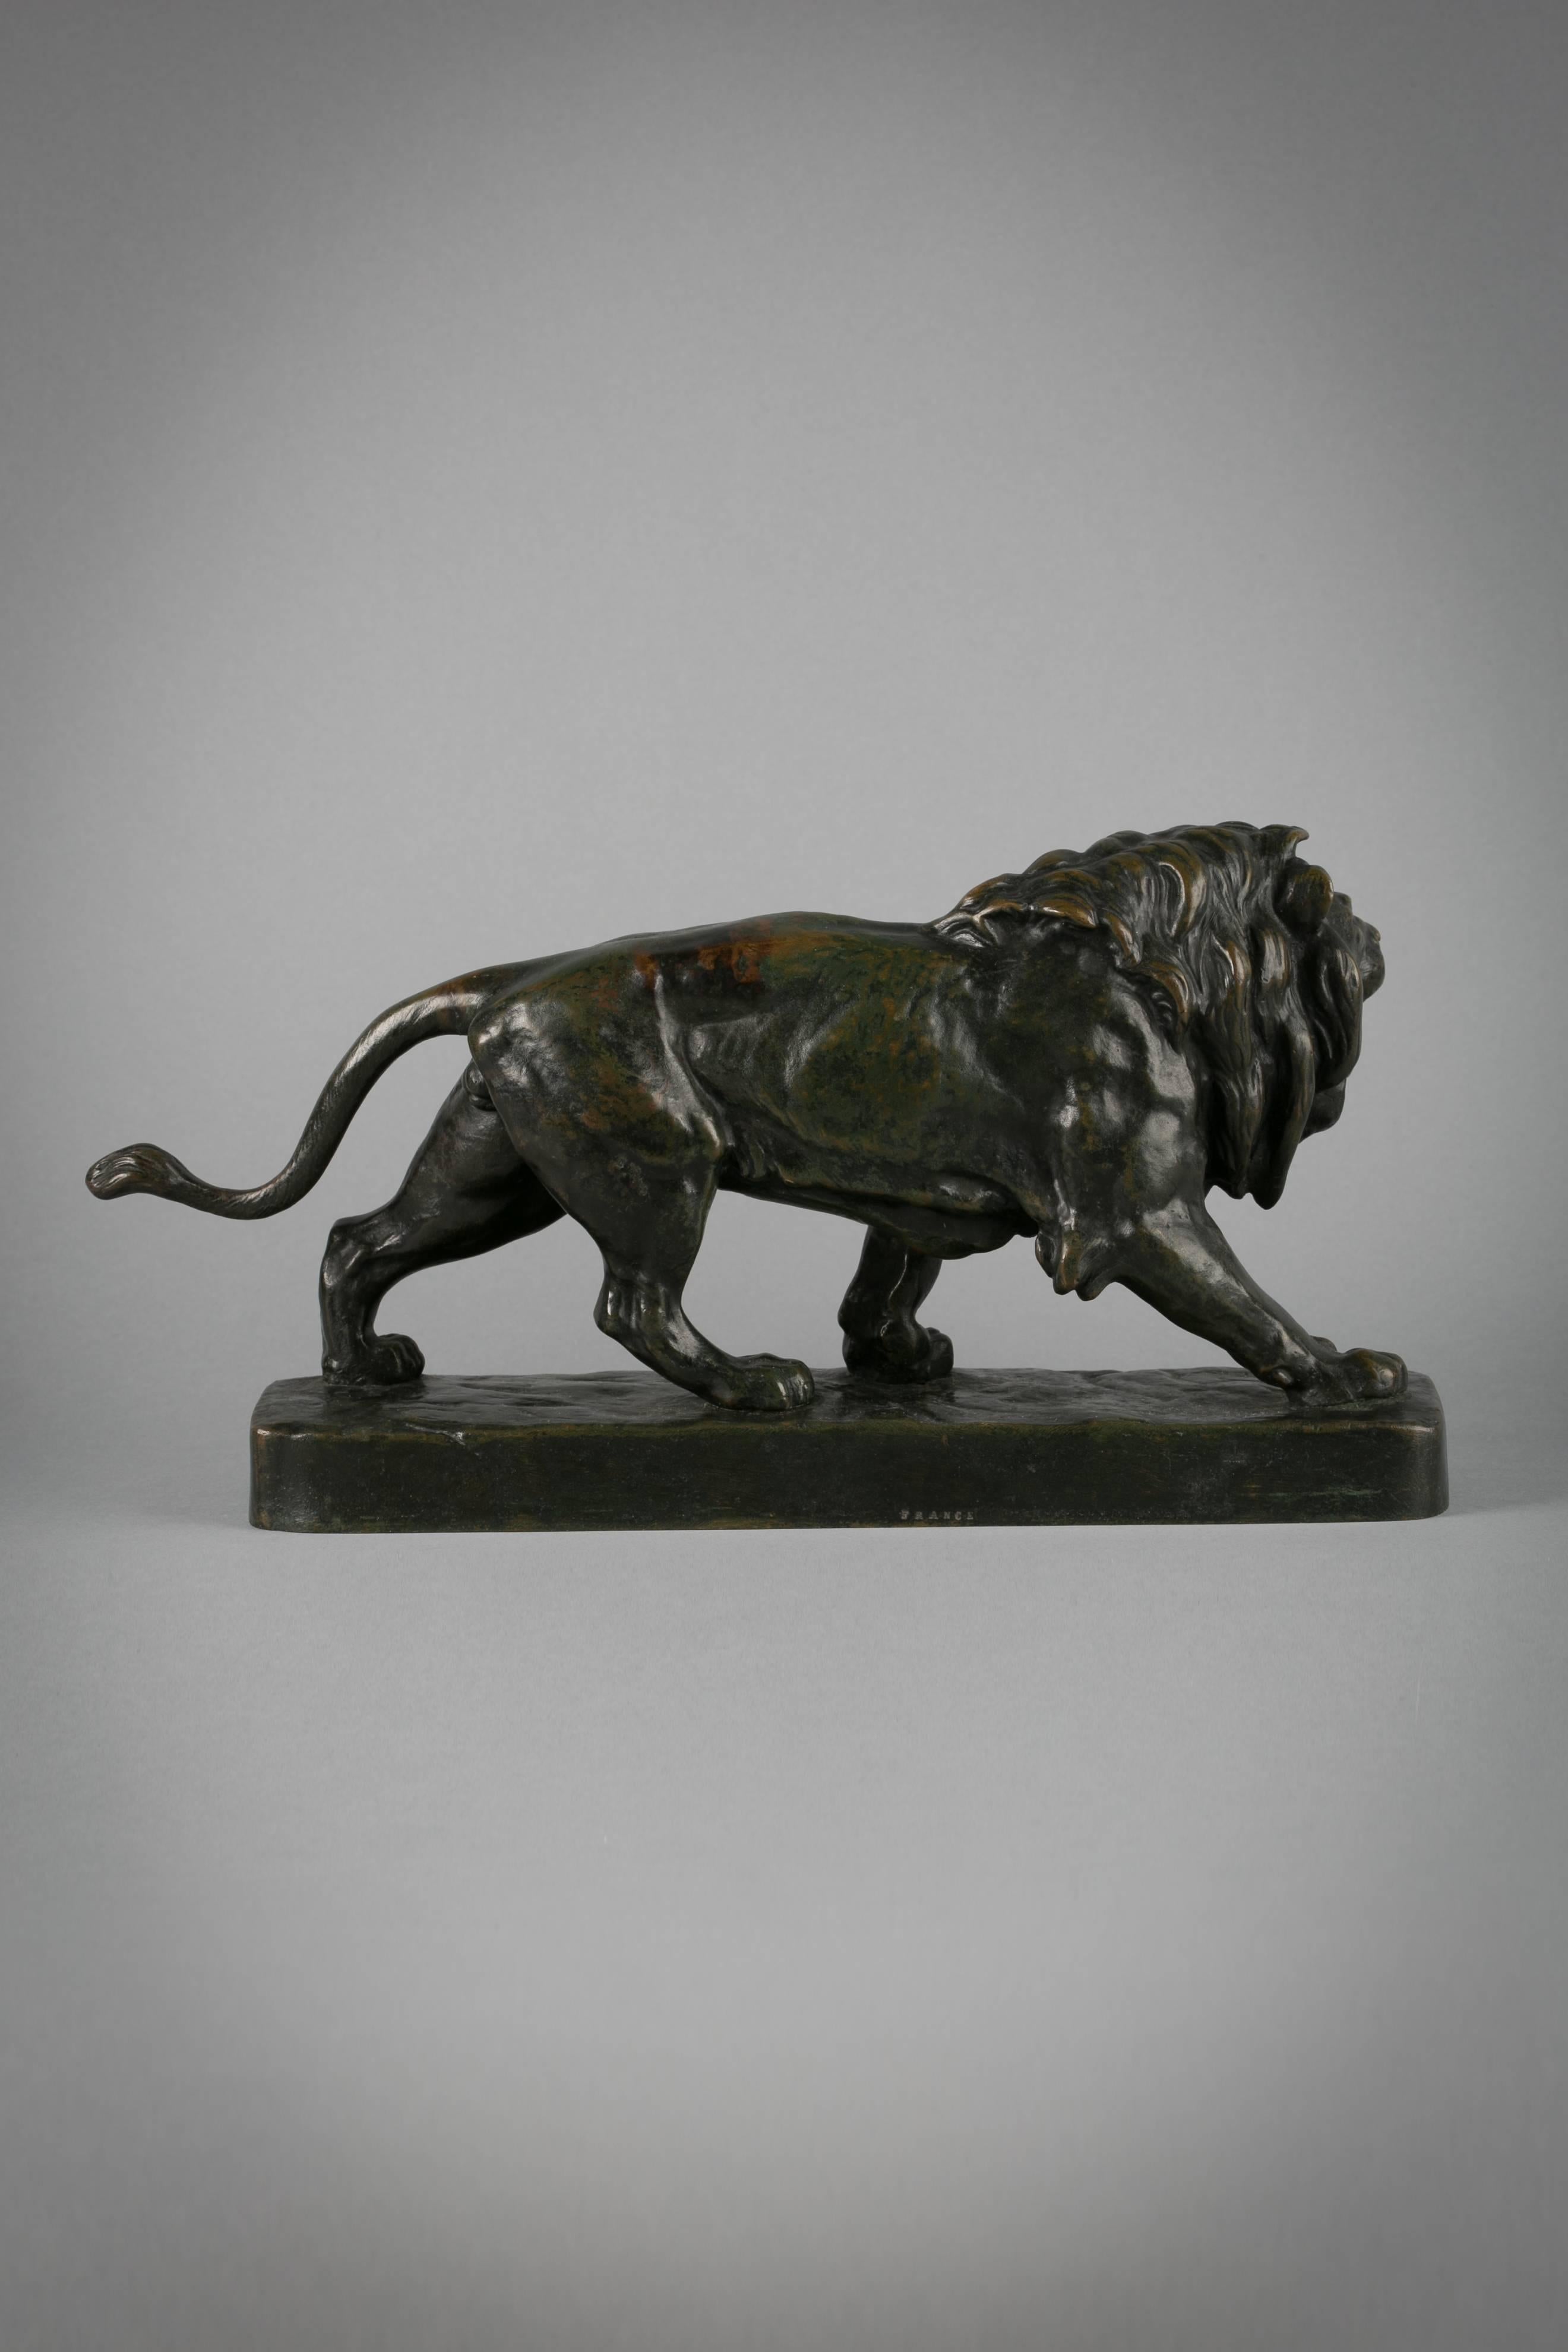 French bronze figure of a striding lion, circa 1860

Signed by Louis Vidal (1831-1892).